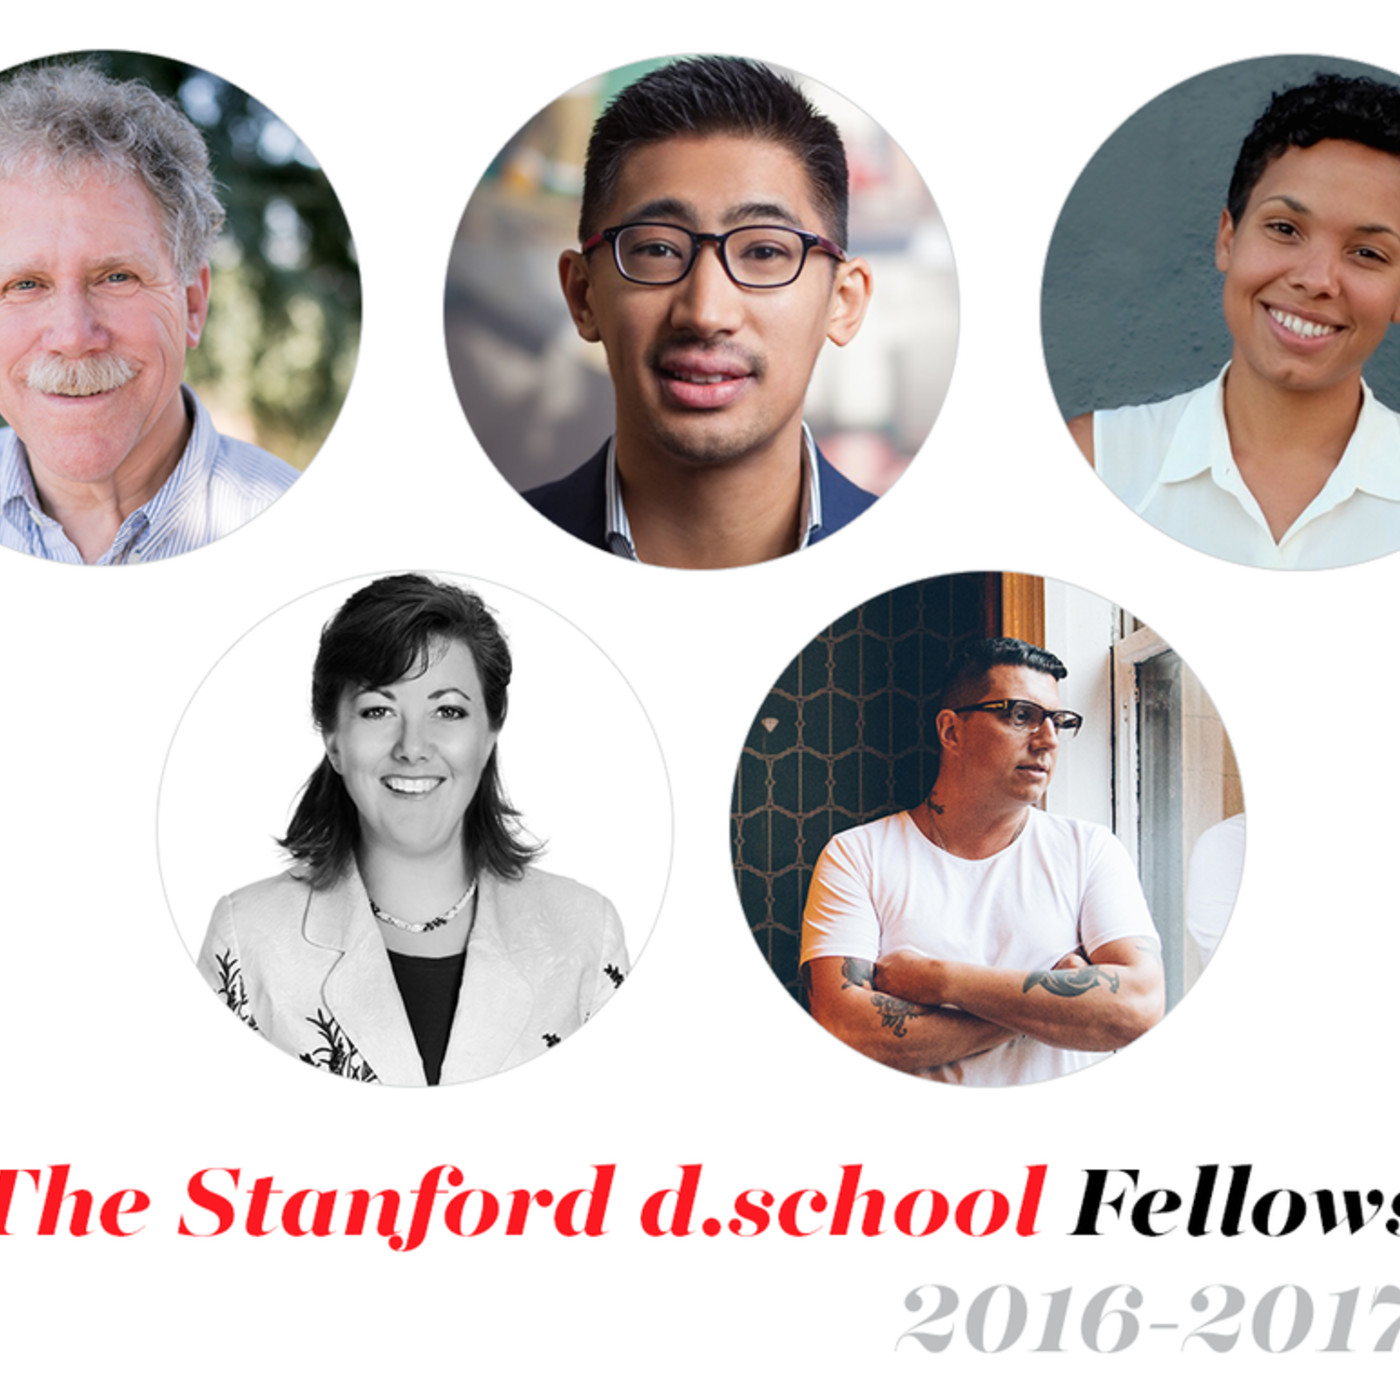 RMV 18 Stanford d.school Civic Innovation Fellows: You Can Design Impact at Scale